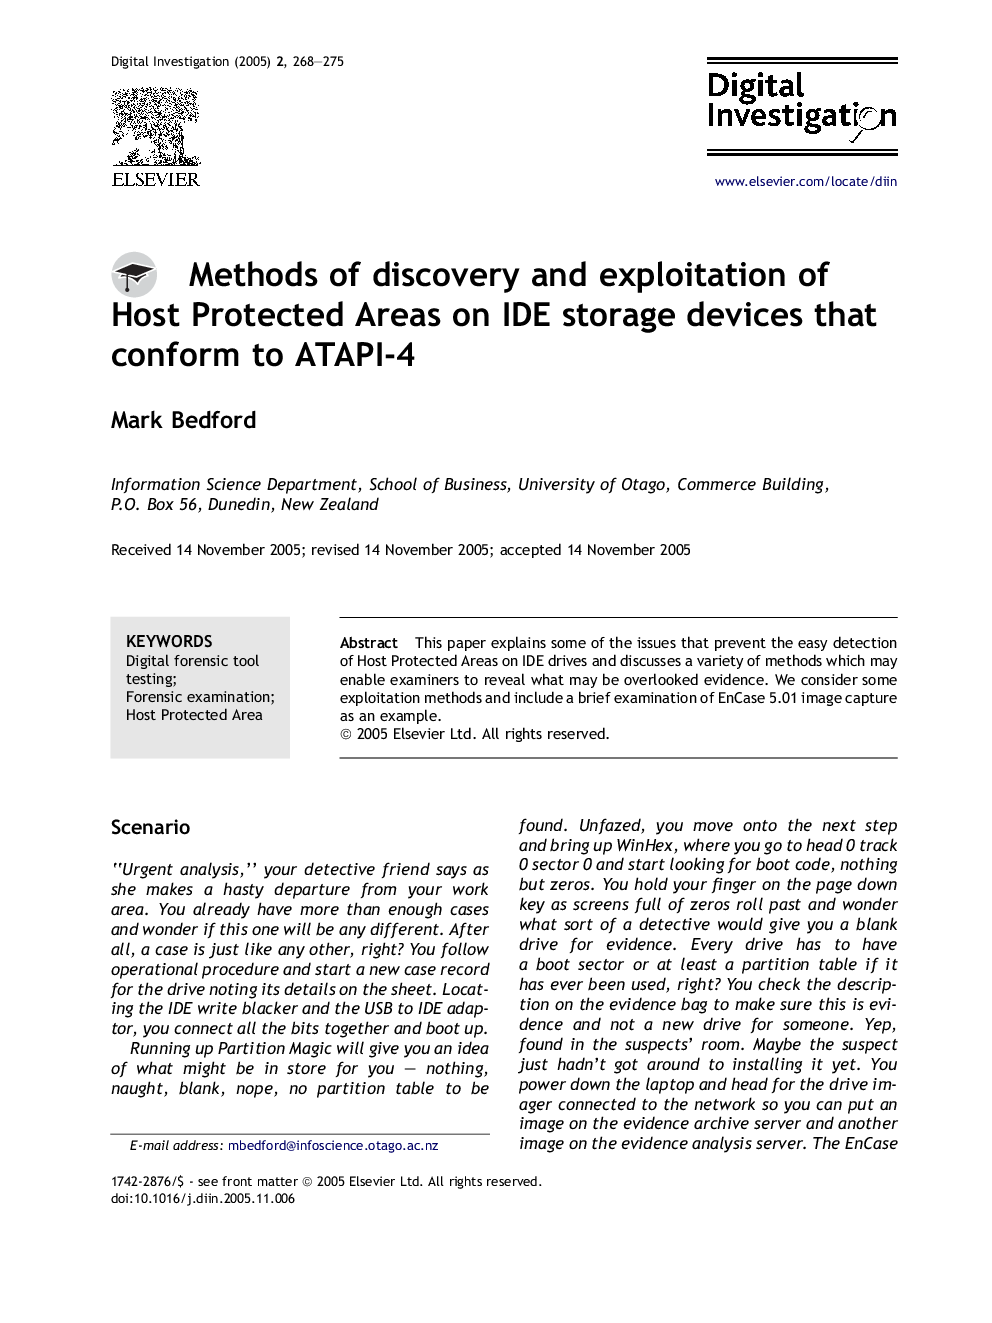 Methods of discovery and exploitation of Host Protected Areas on IDE storage devices that conform to ATAPI-4